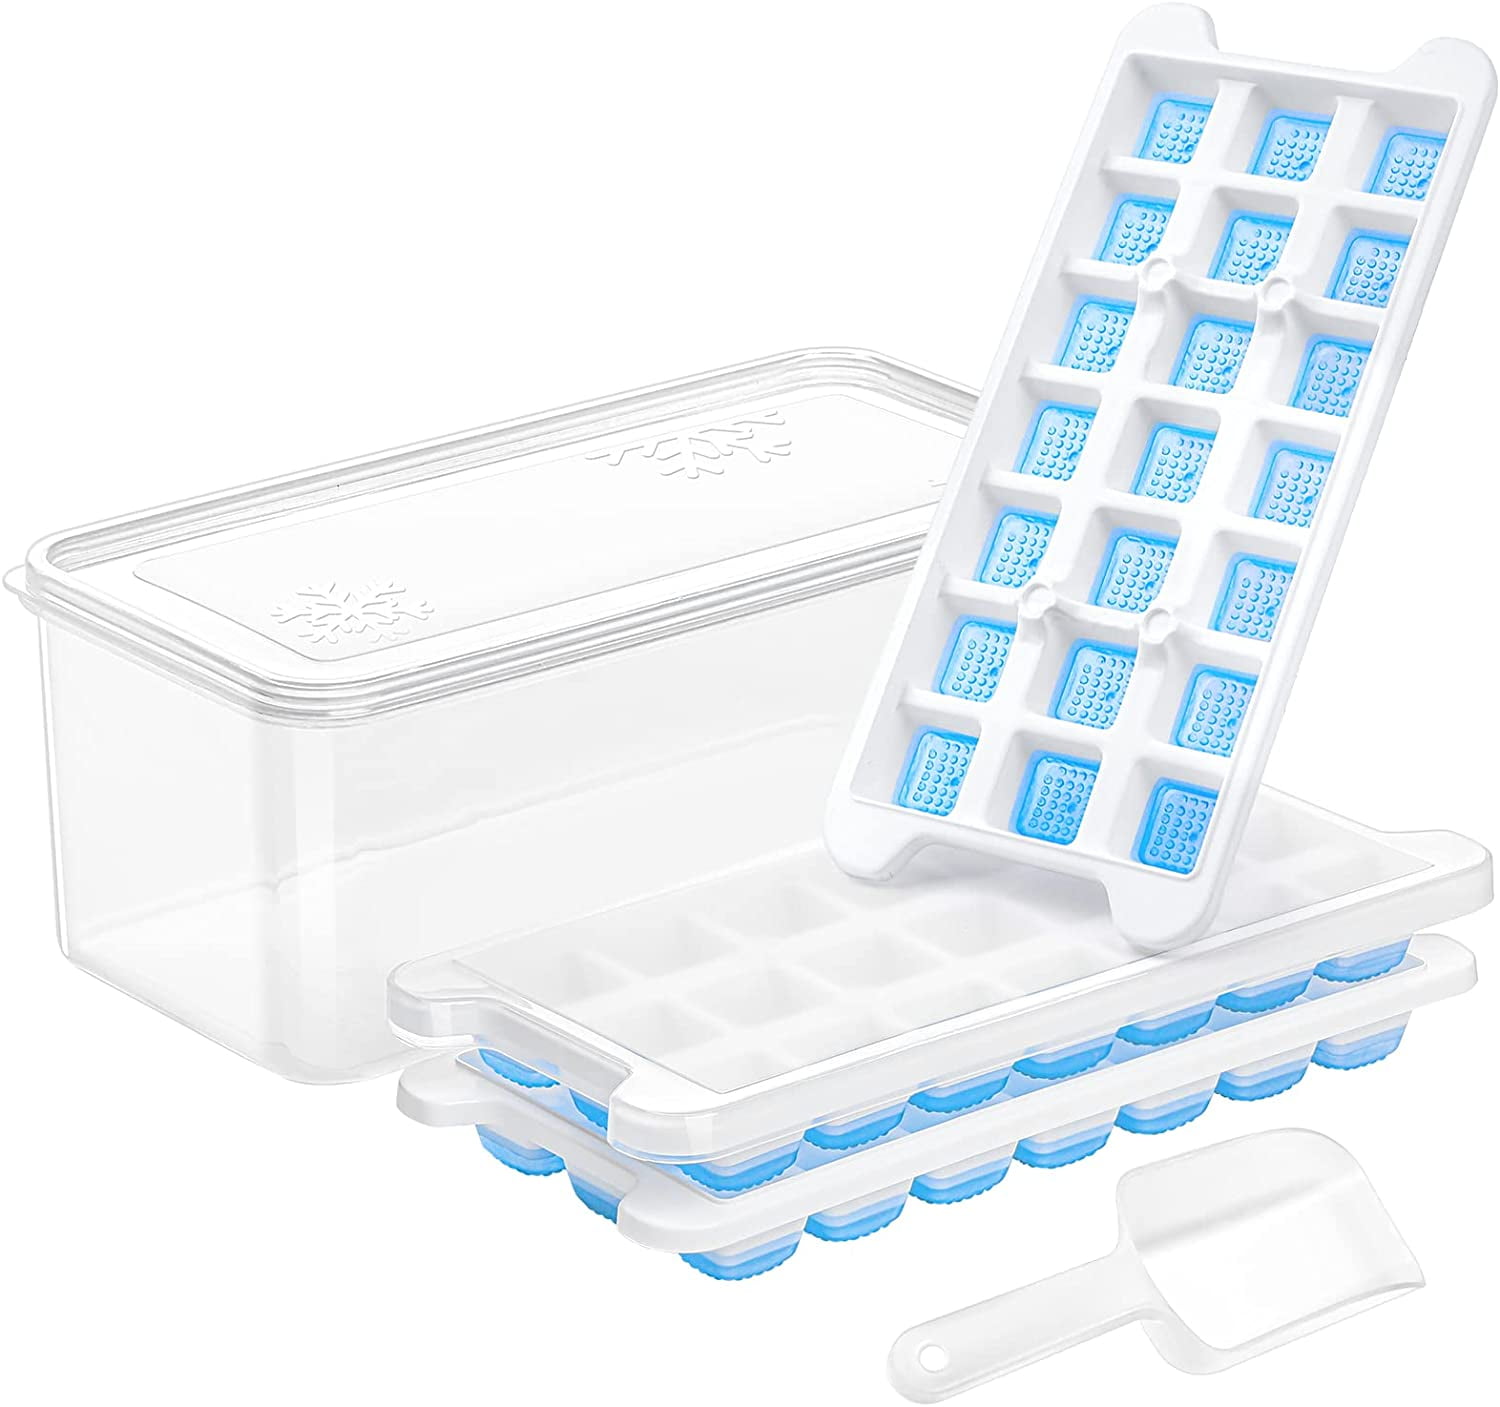 Jeexi Ice Cube Tray with Bin for Freezer, Easy Release 36 Mini Nuggets Ice Tray with S